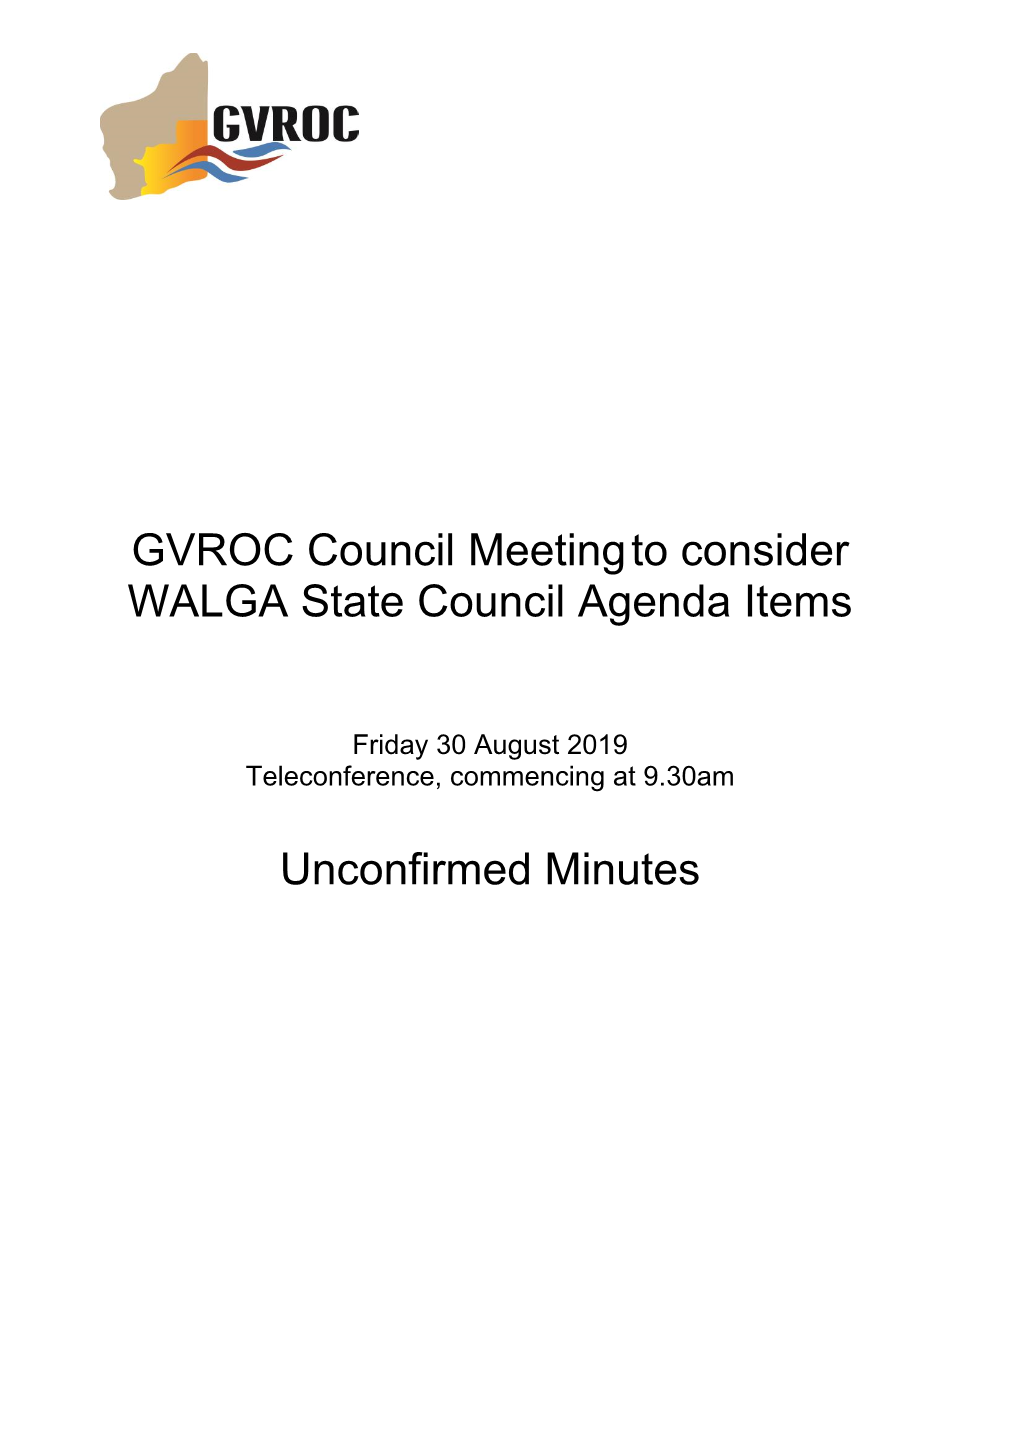 Council Meeting to Consider WALGA State Council Agenda Items